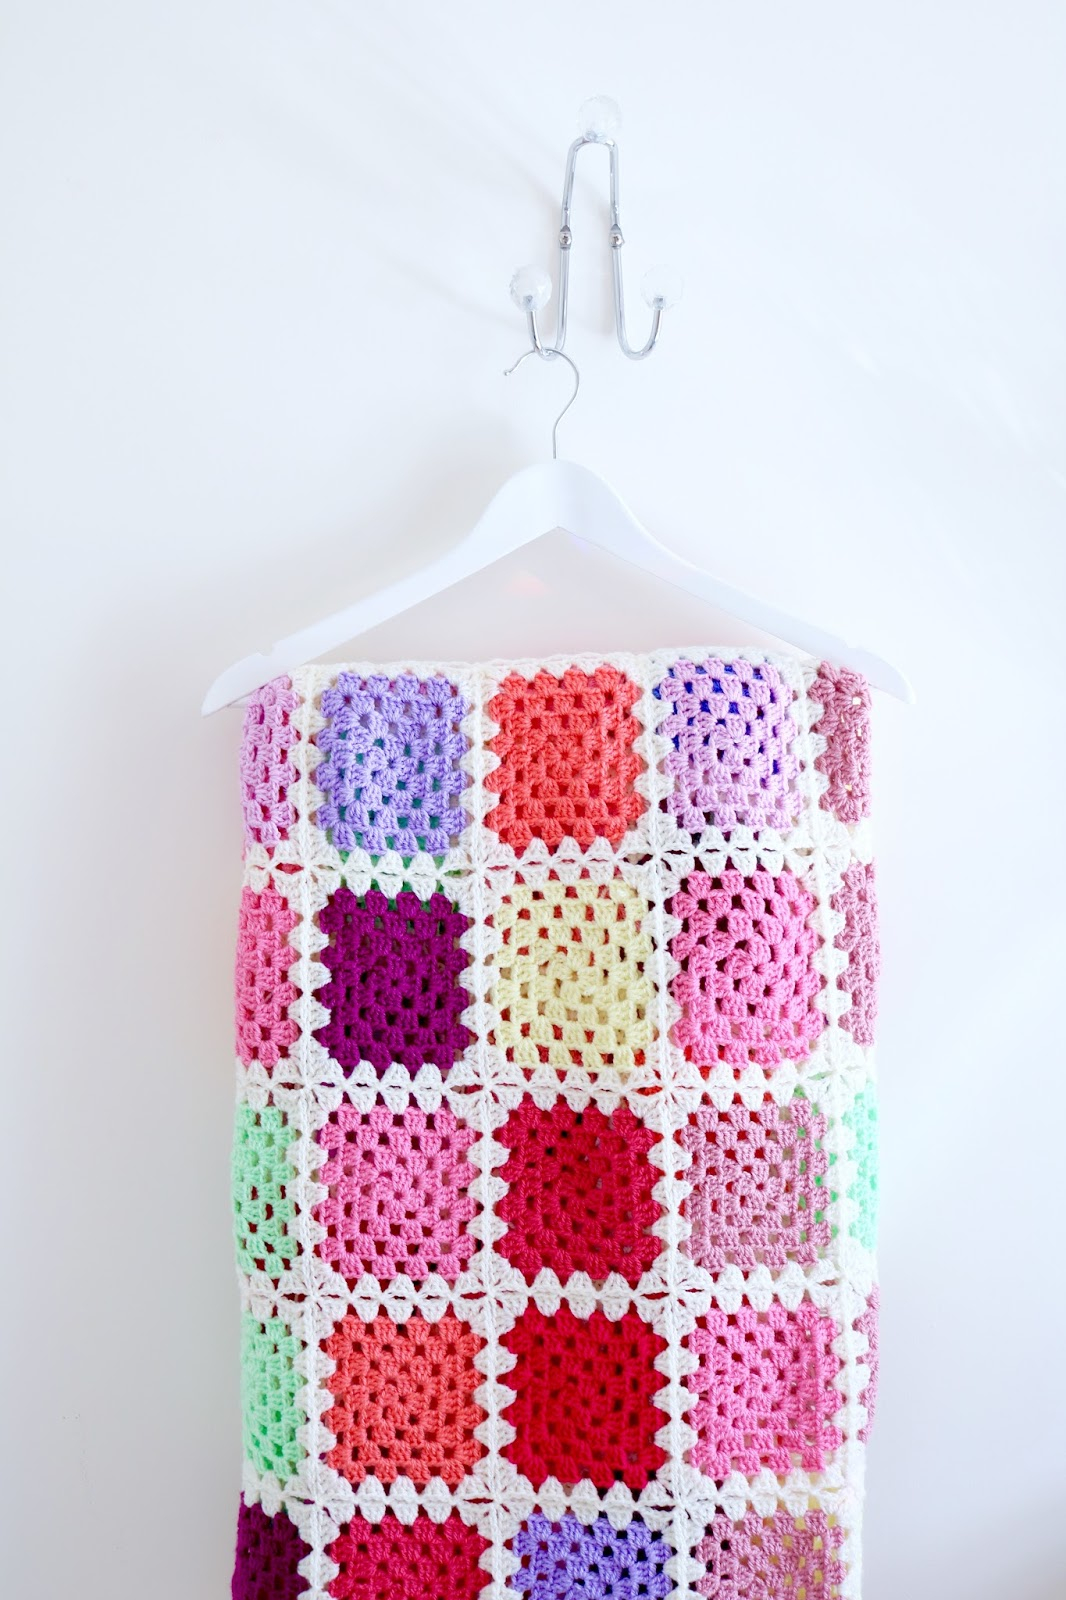 Crochet Granny Square Pattern How To Crochet A Granny Square Easy Beginners Tutorial